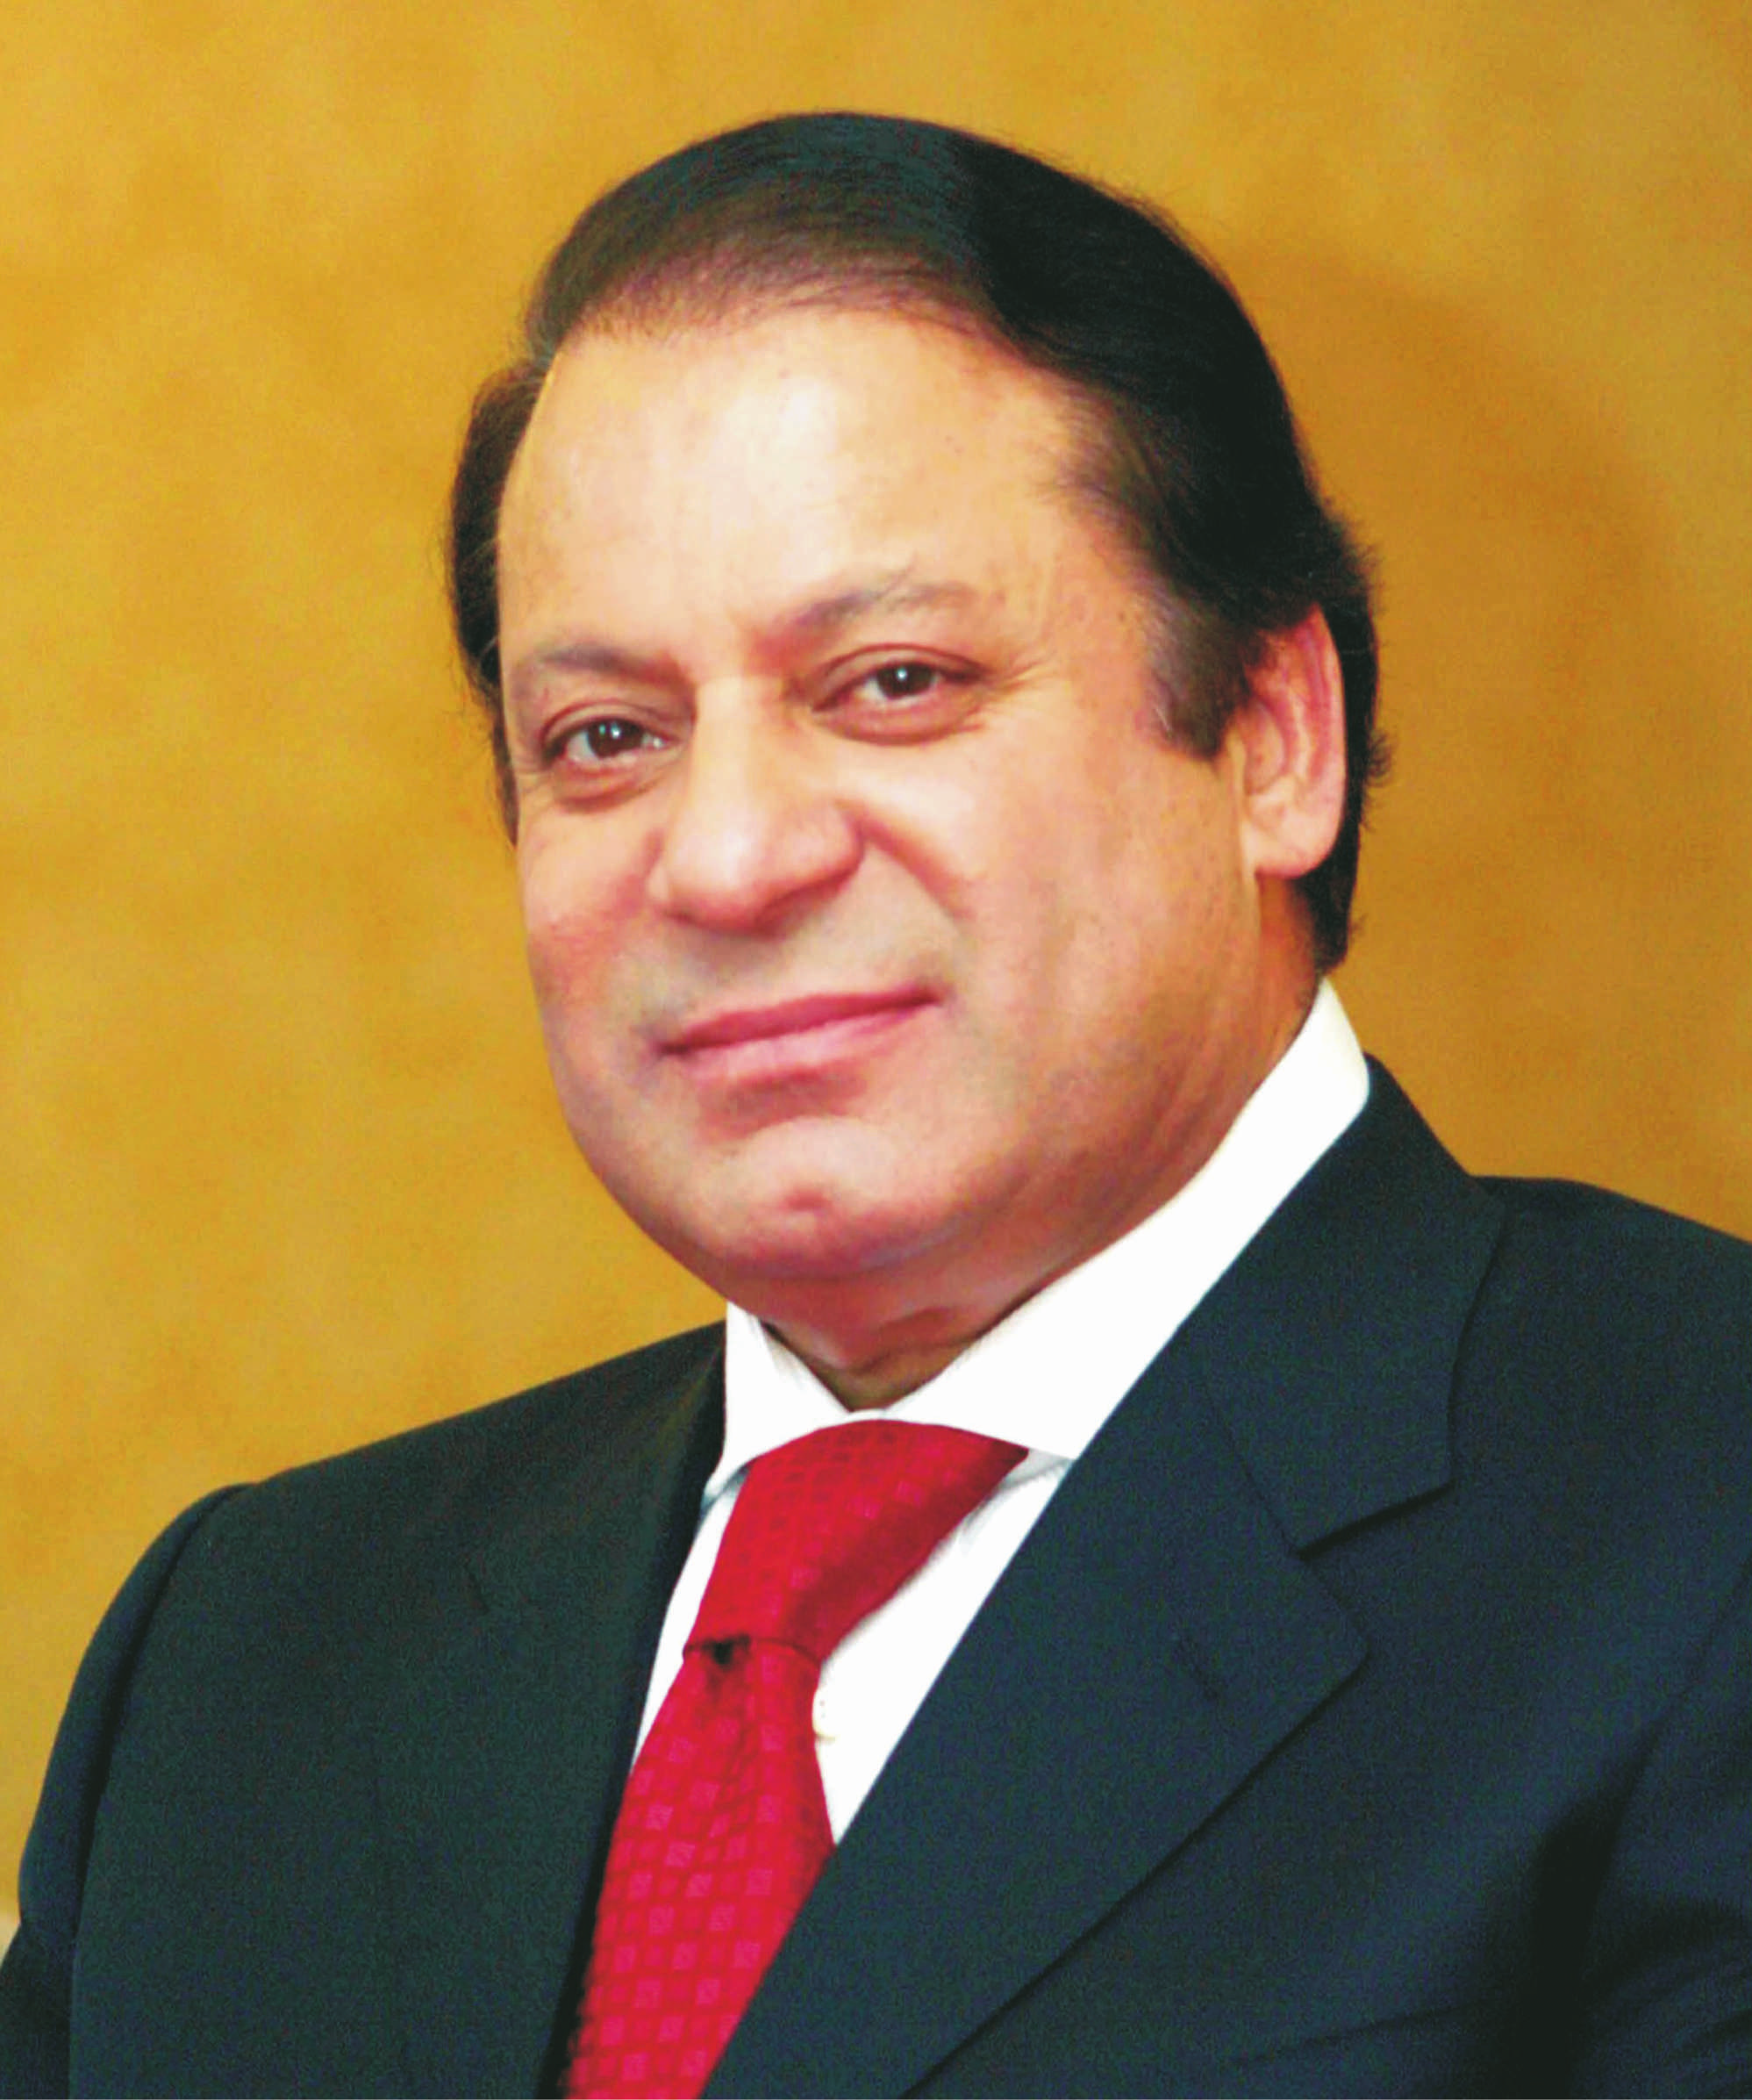 Message from the Honorable Prime Minister of Pakistan